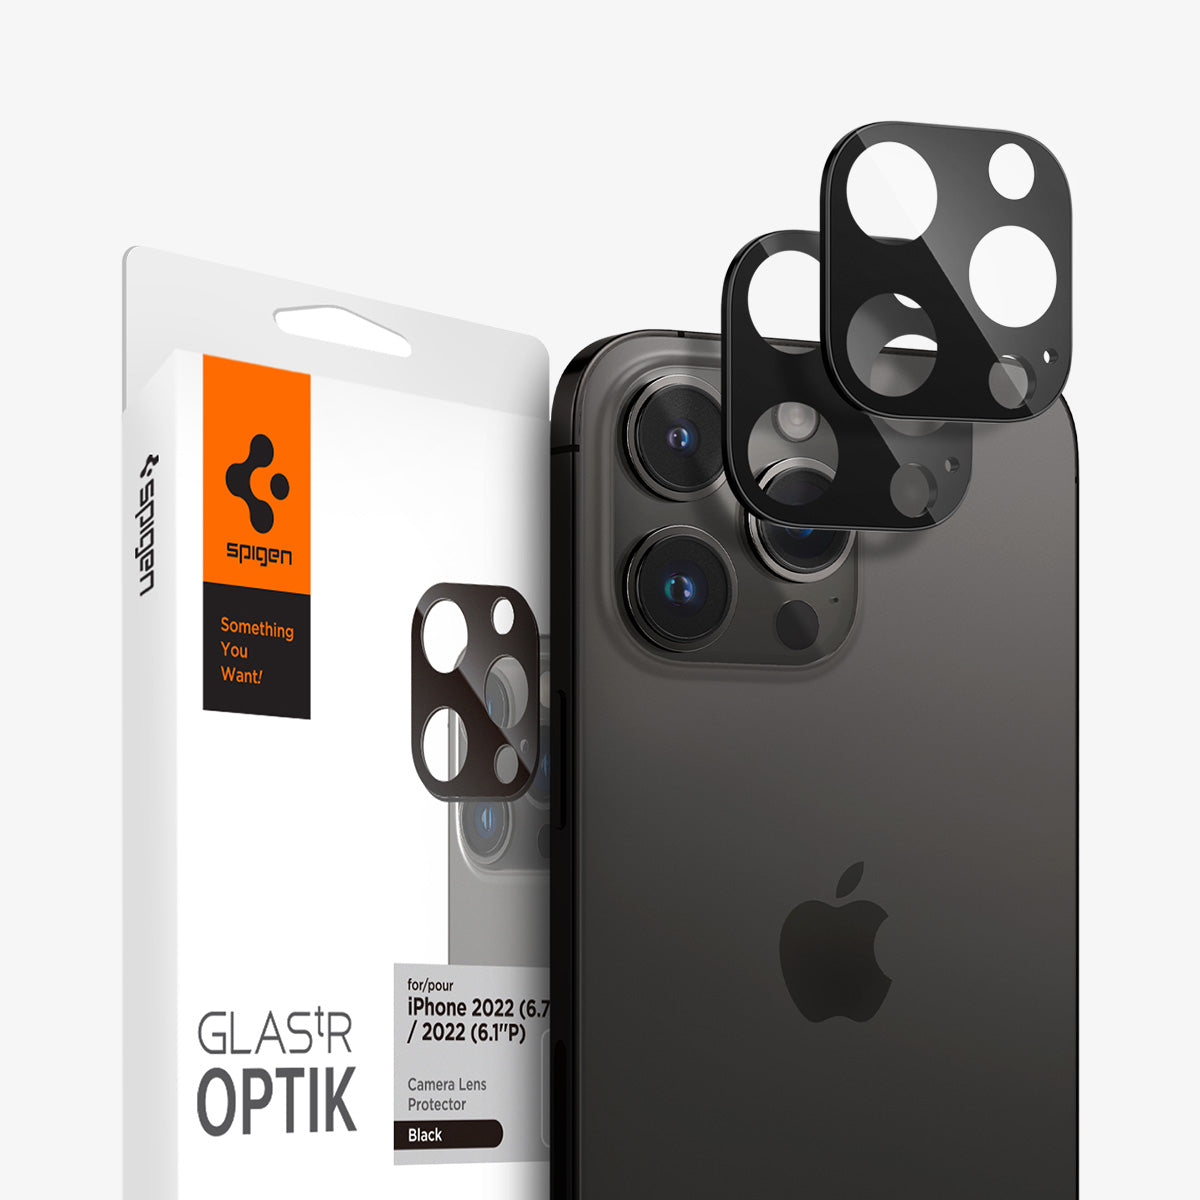 AGL06913 - iPhone 14 Pro / 14 Pro Max Optik Lens Protector in black showing the device, two optik lens protectors and packaging